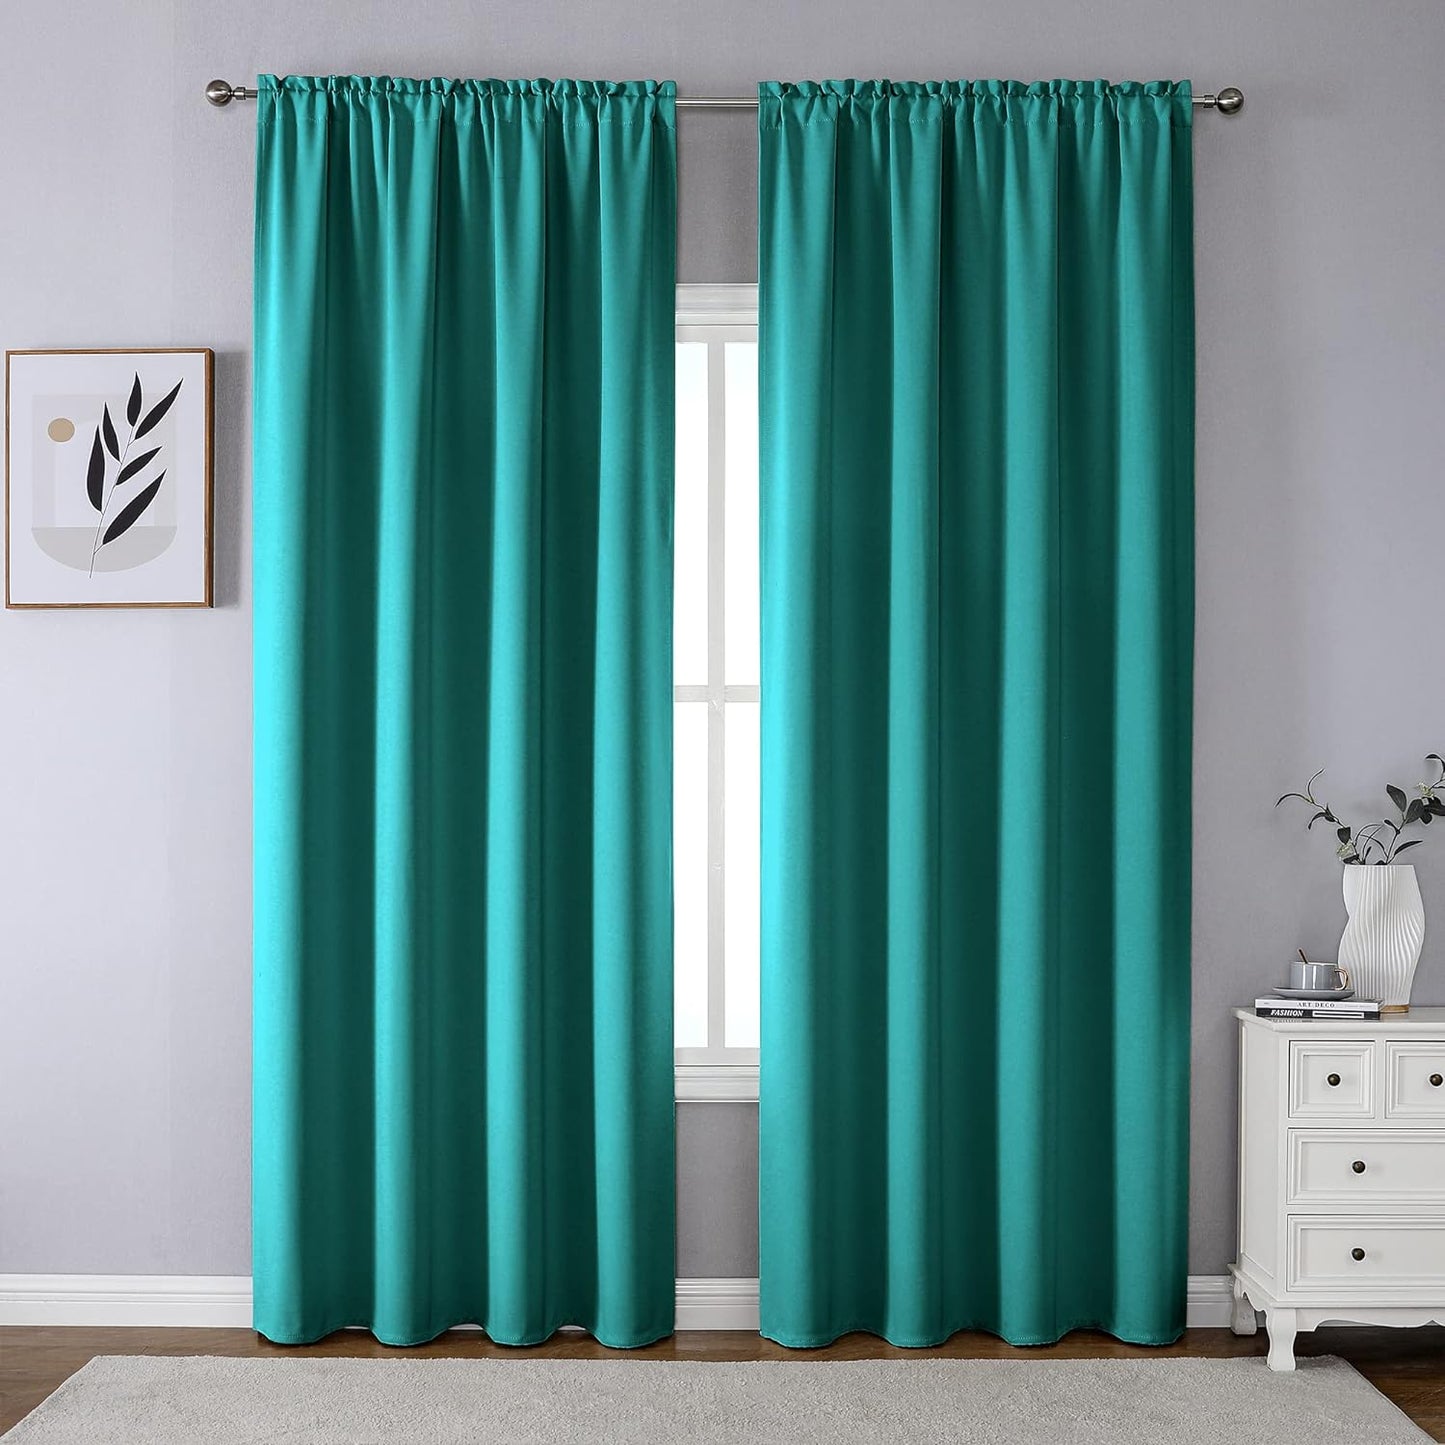 CUCRAF Blackout Curtains 84 Inches Long for Living Room, Light Beige Room Darkening Window Curtain Panels, Rod Pocket Thermal Insulated Solid Drapes for Bedroom, 52X84 Inch, Set of 2 Panels  CUCRAF Turquoise 52W X 95L Inch 2 Panels 